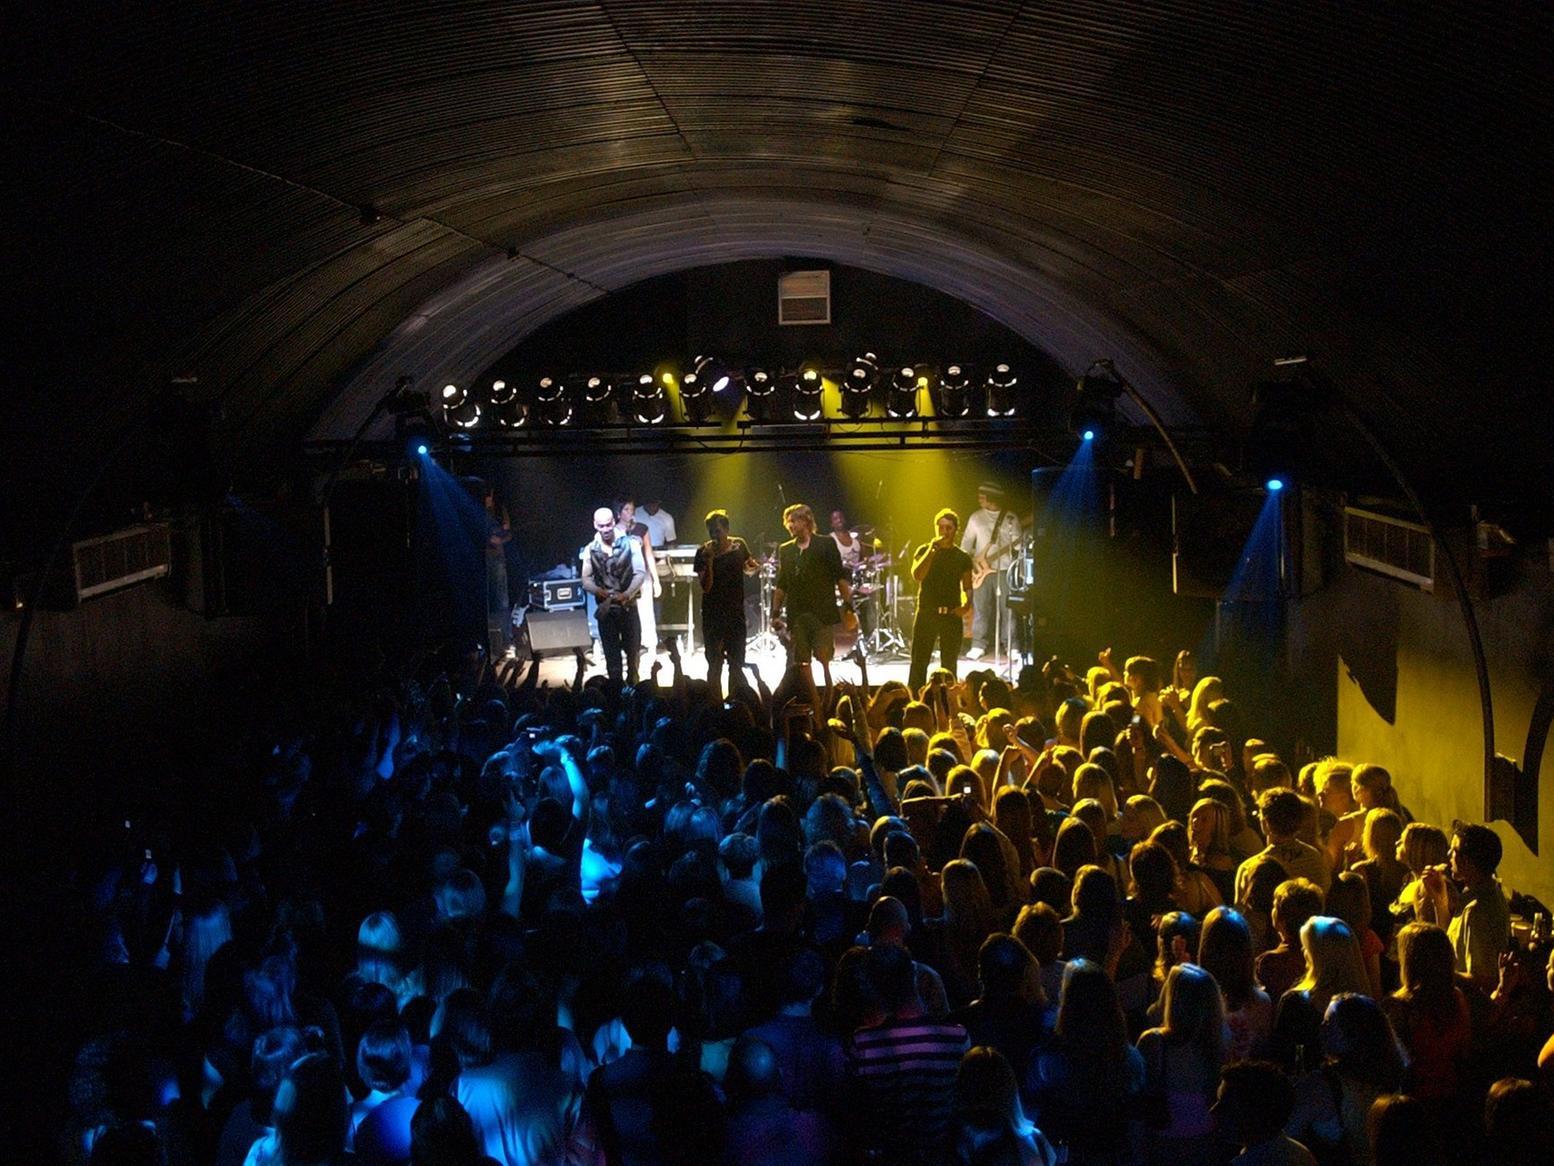 Boyband Blue proved to be a hit when they came to perform for fans in Leeds. When: 12 October 2004